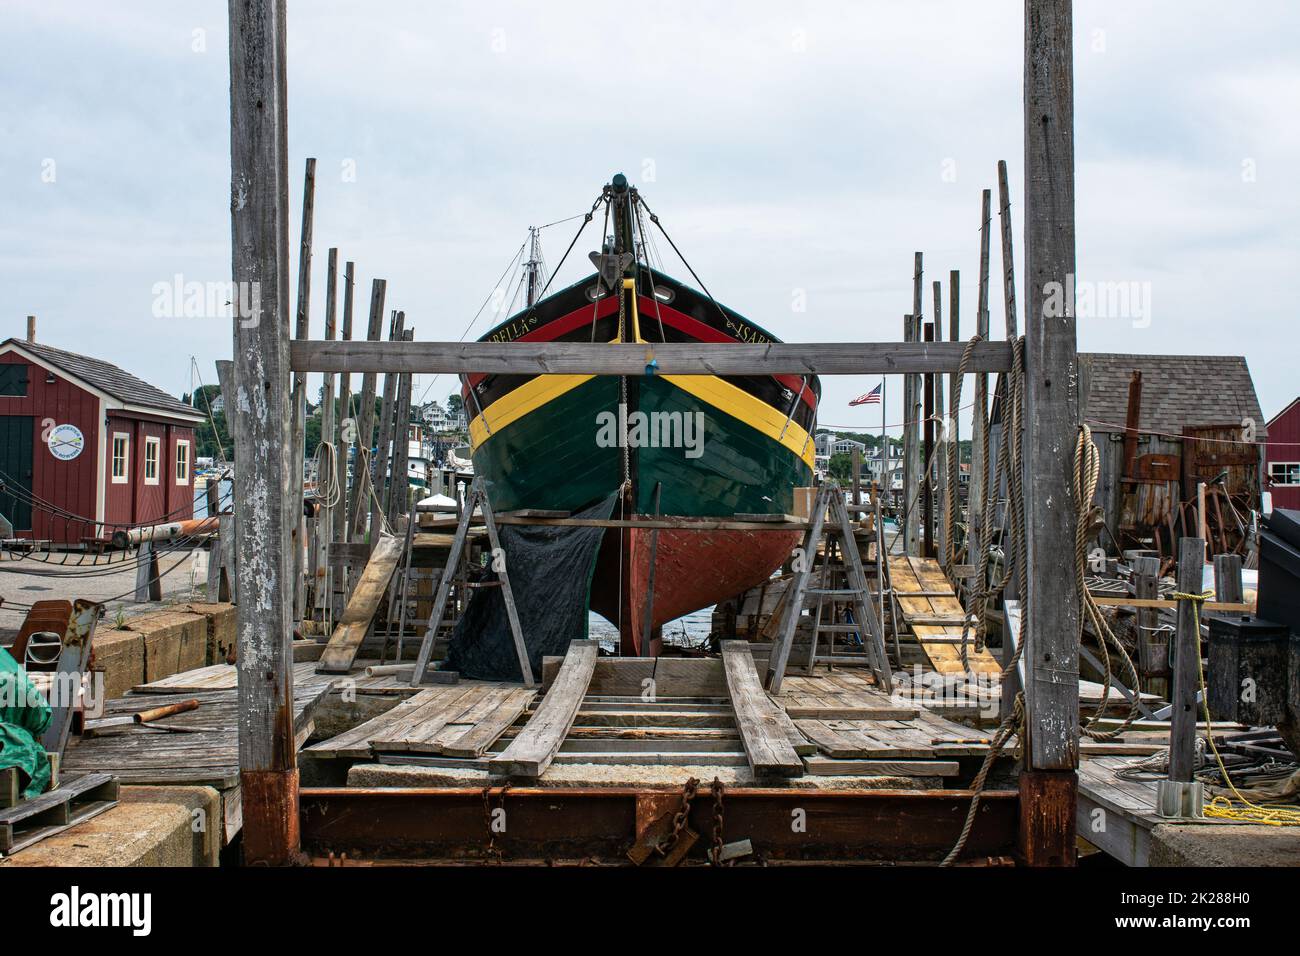 The Isabella a vintage wooden ship in drydock in Gloucester Harbor, Massachusetts. Stock Photo